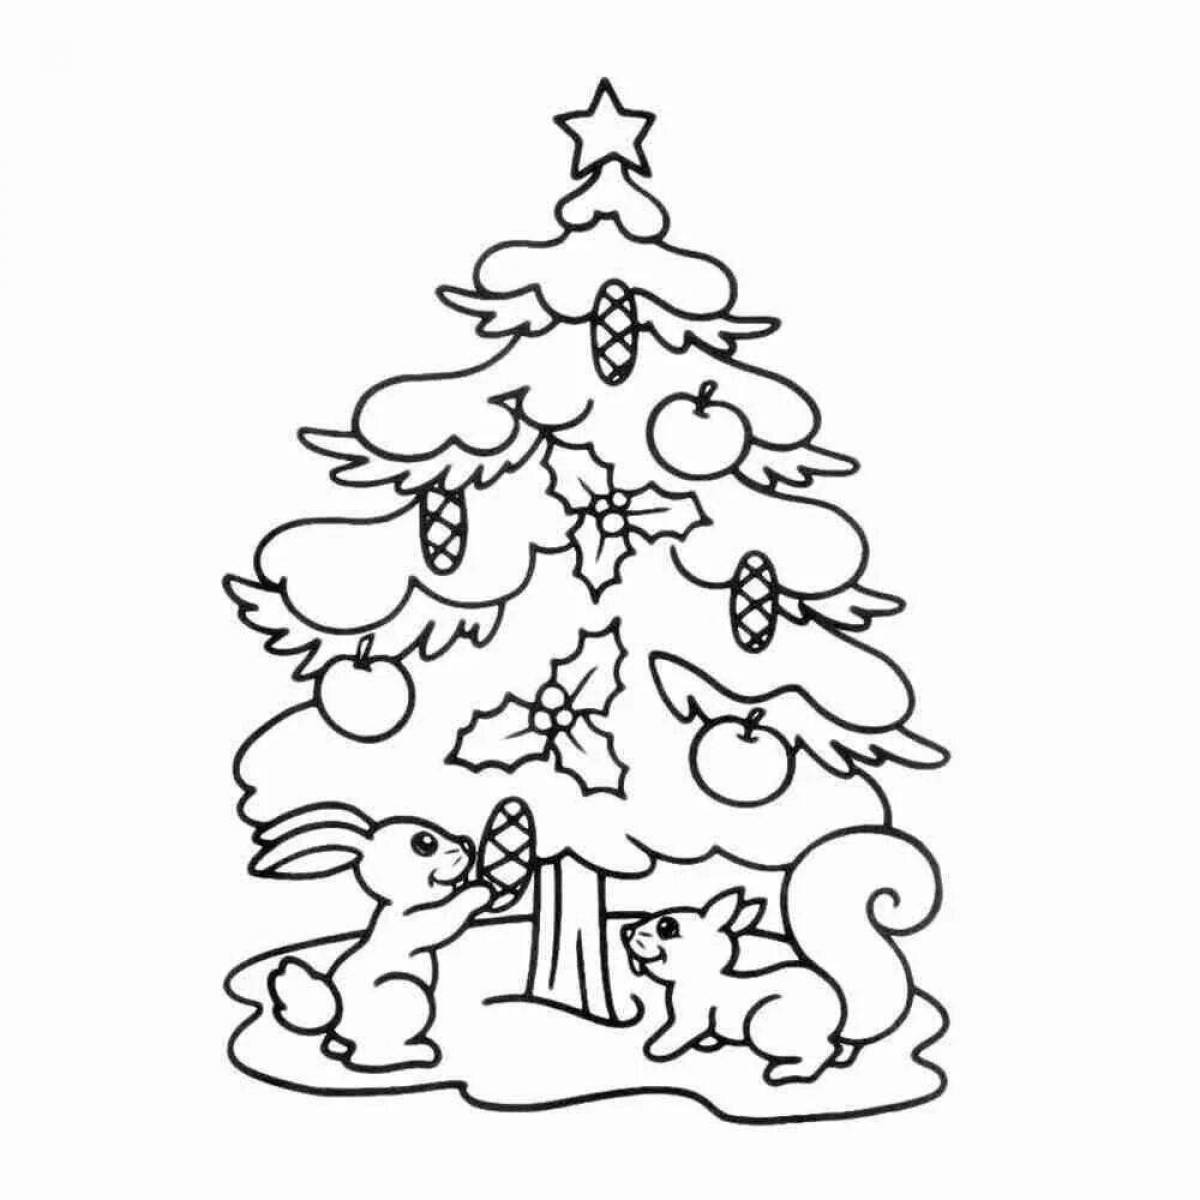 Joyful forest raised a Christmas tree coloring book